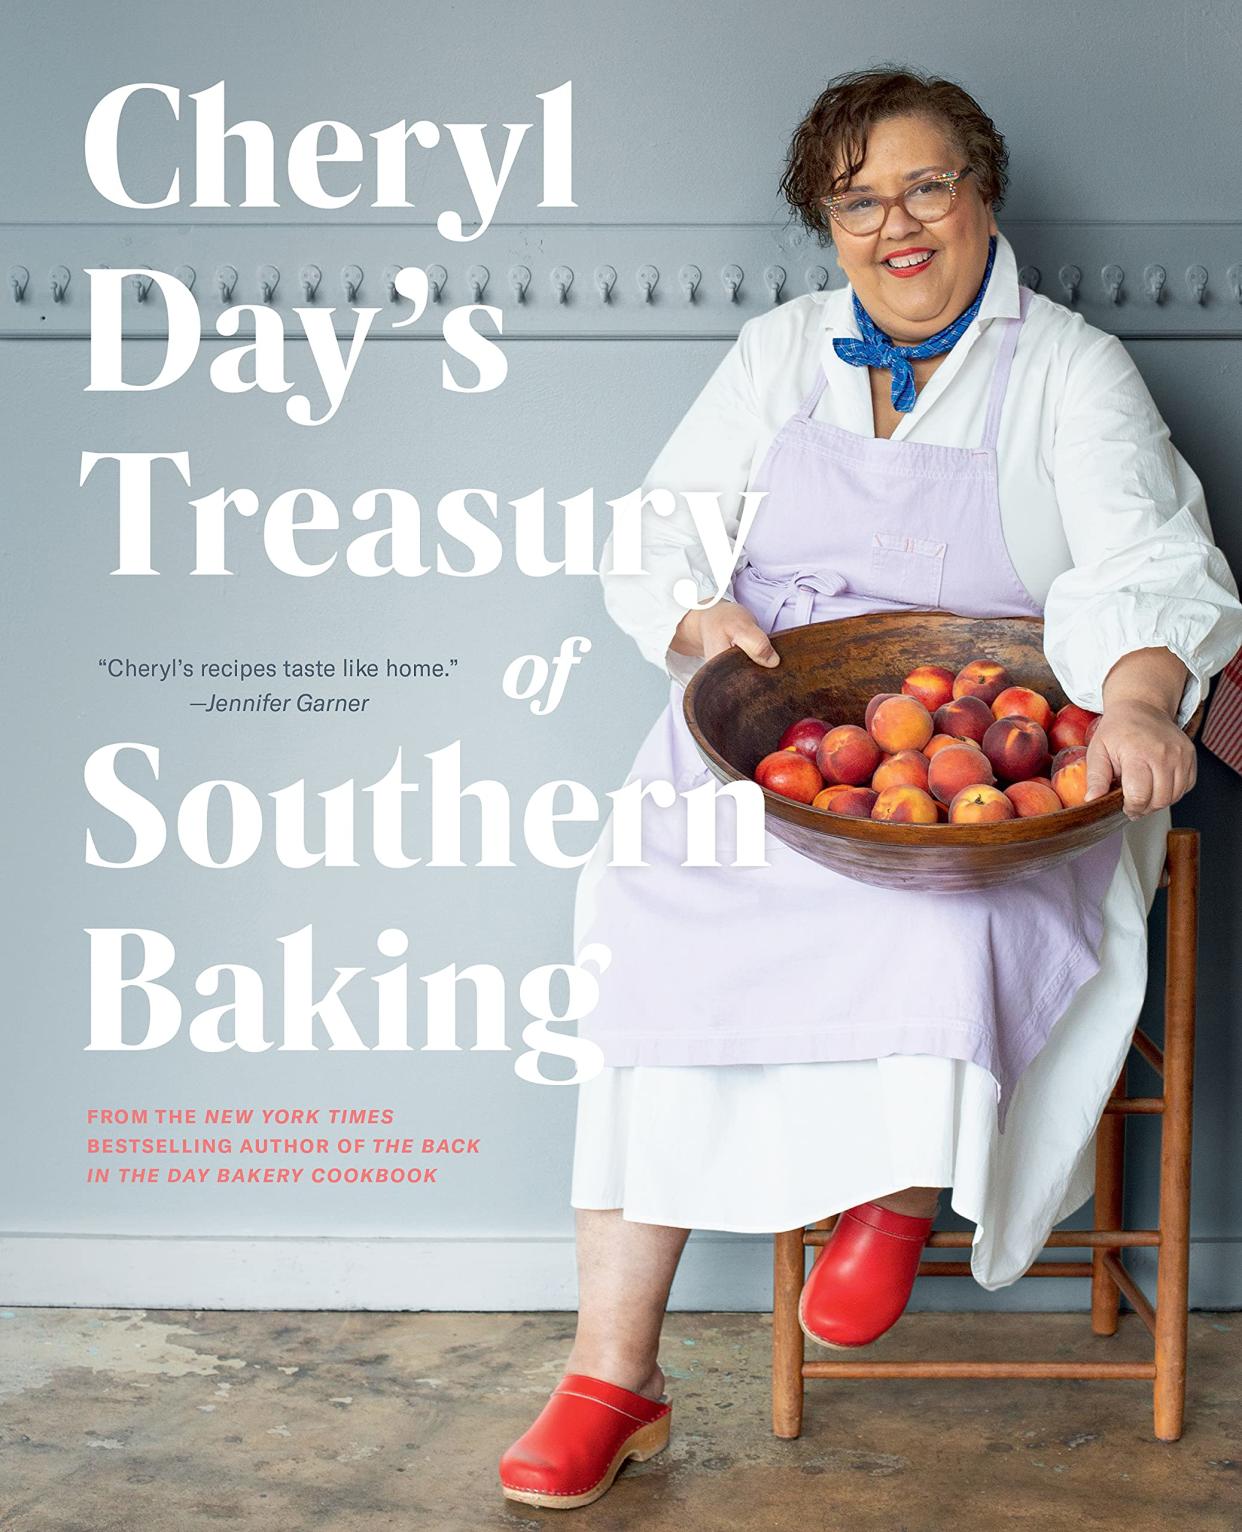 "Cheryl Day's Treasury of Southern Baking" by Cheryl Day